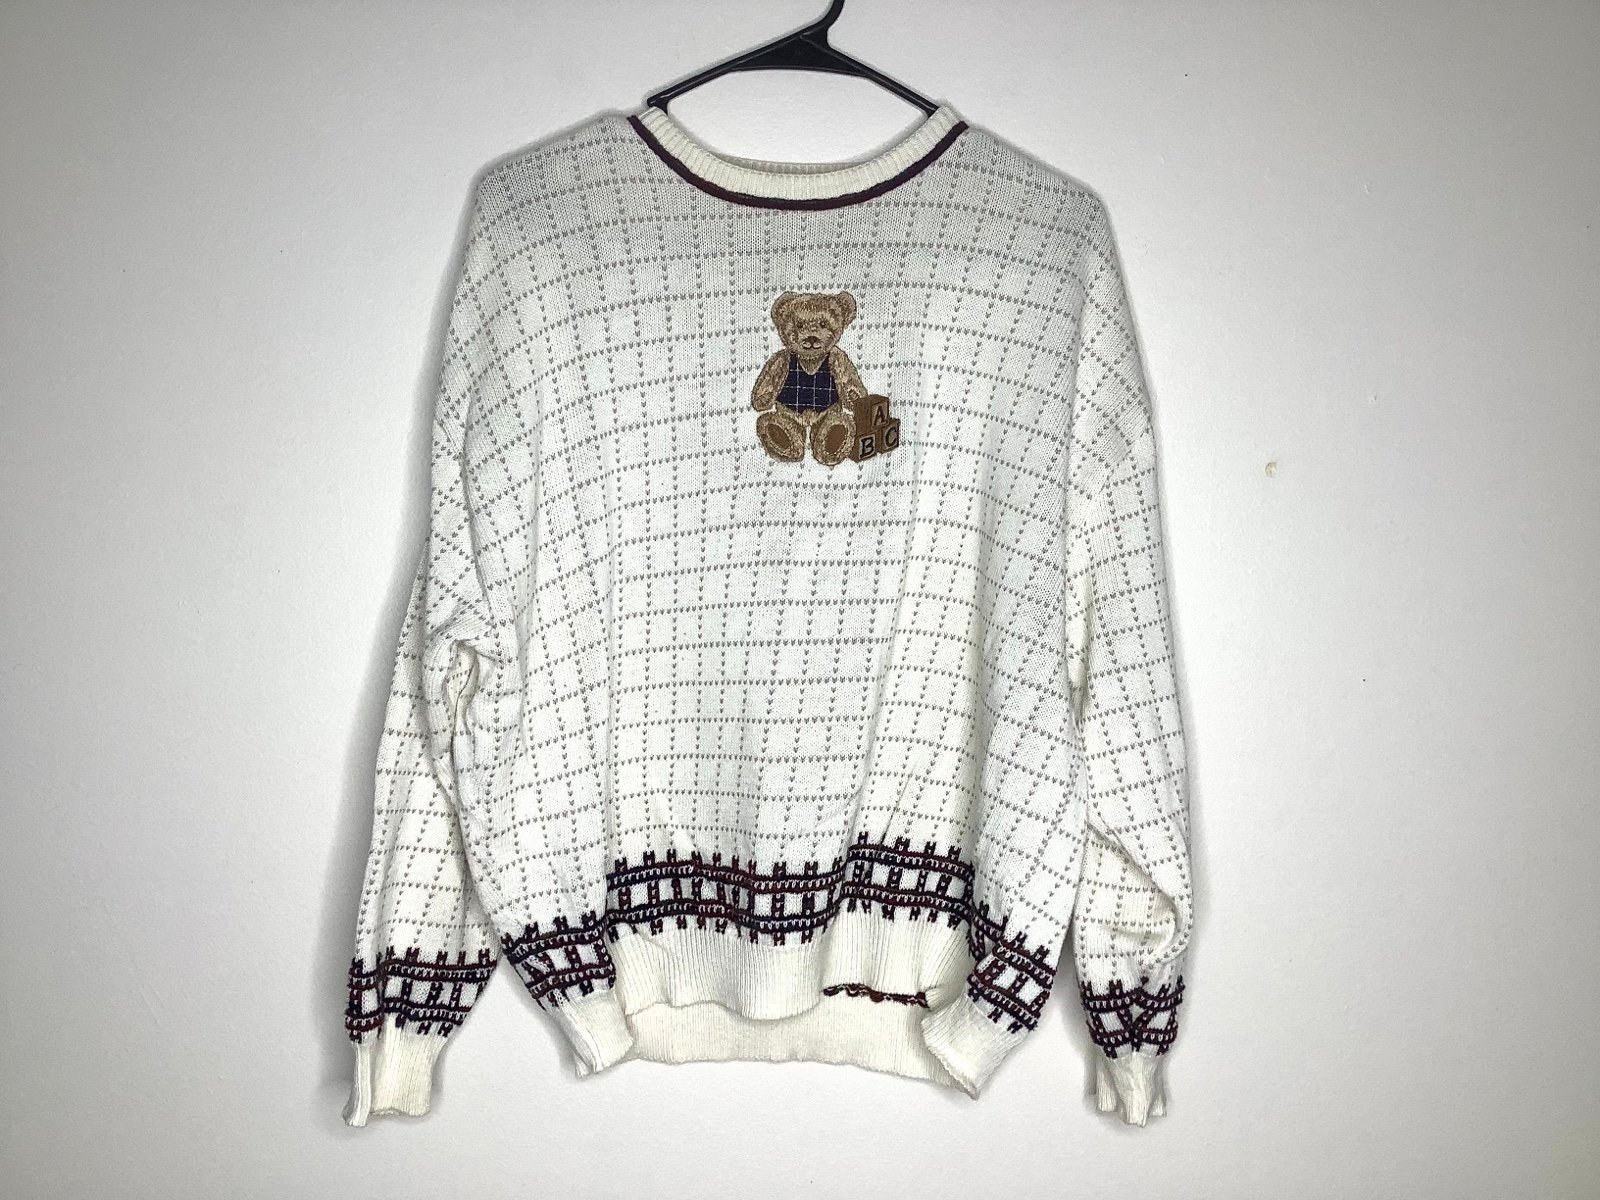 Classic Vintage Embroidered Teddy Bear Sweater JP2IV9rjg just for you